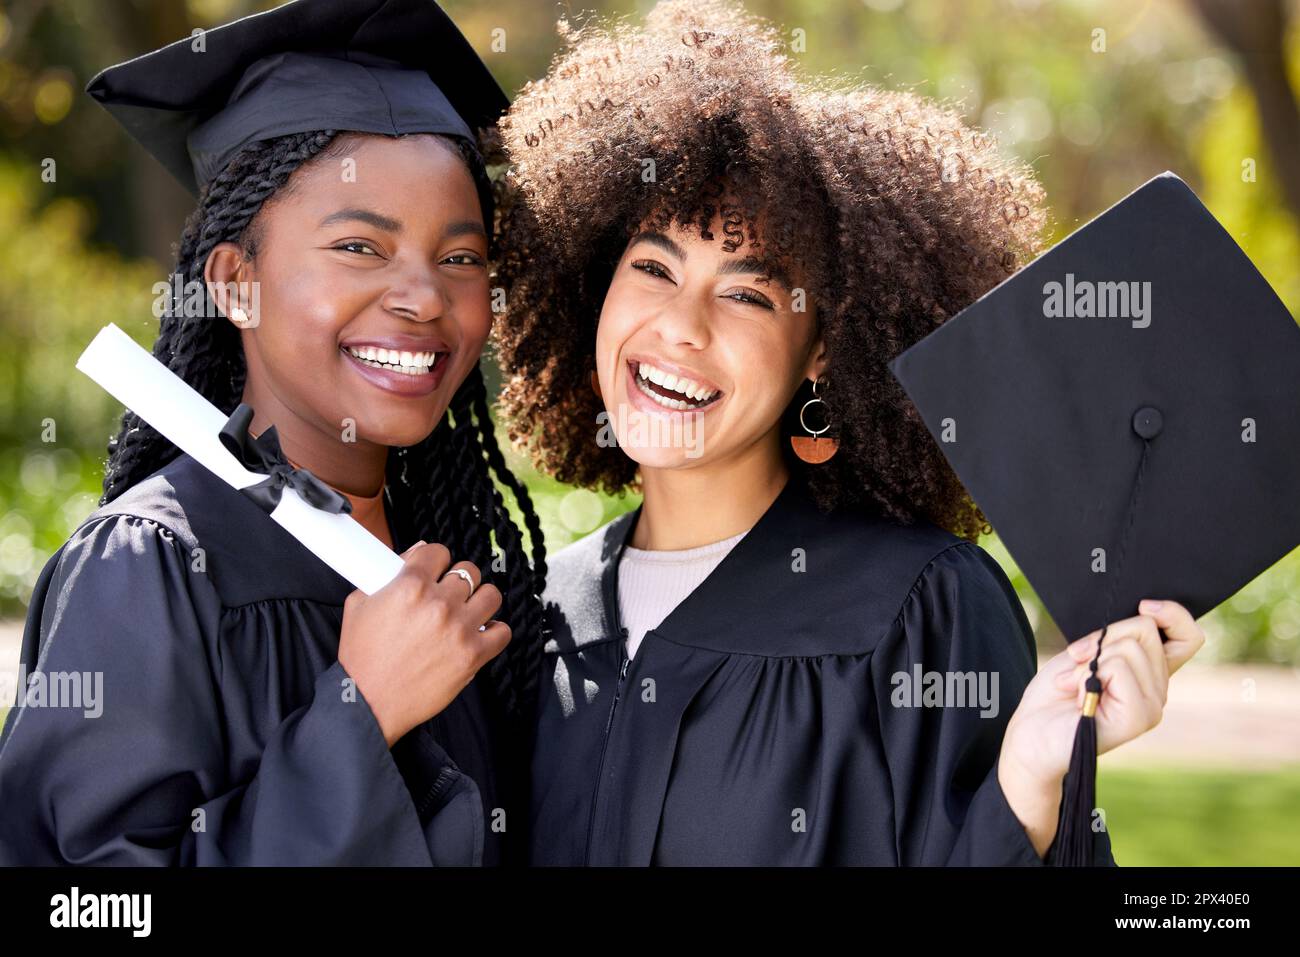 What a rad grad. Portrait of two young women celebrating their graduation  Stock Photo - Alamy